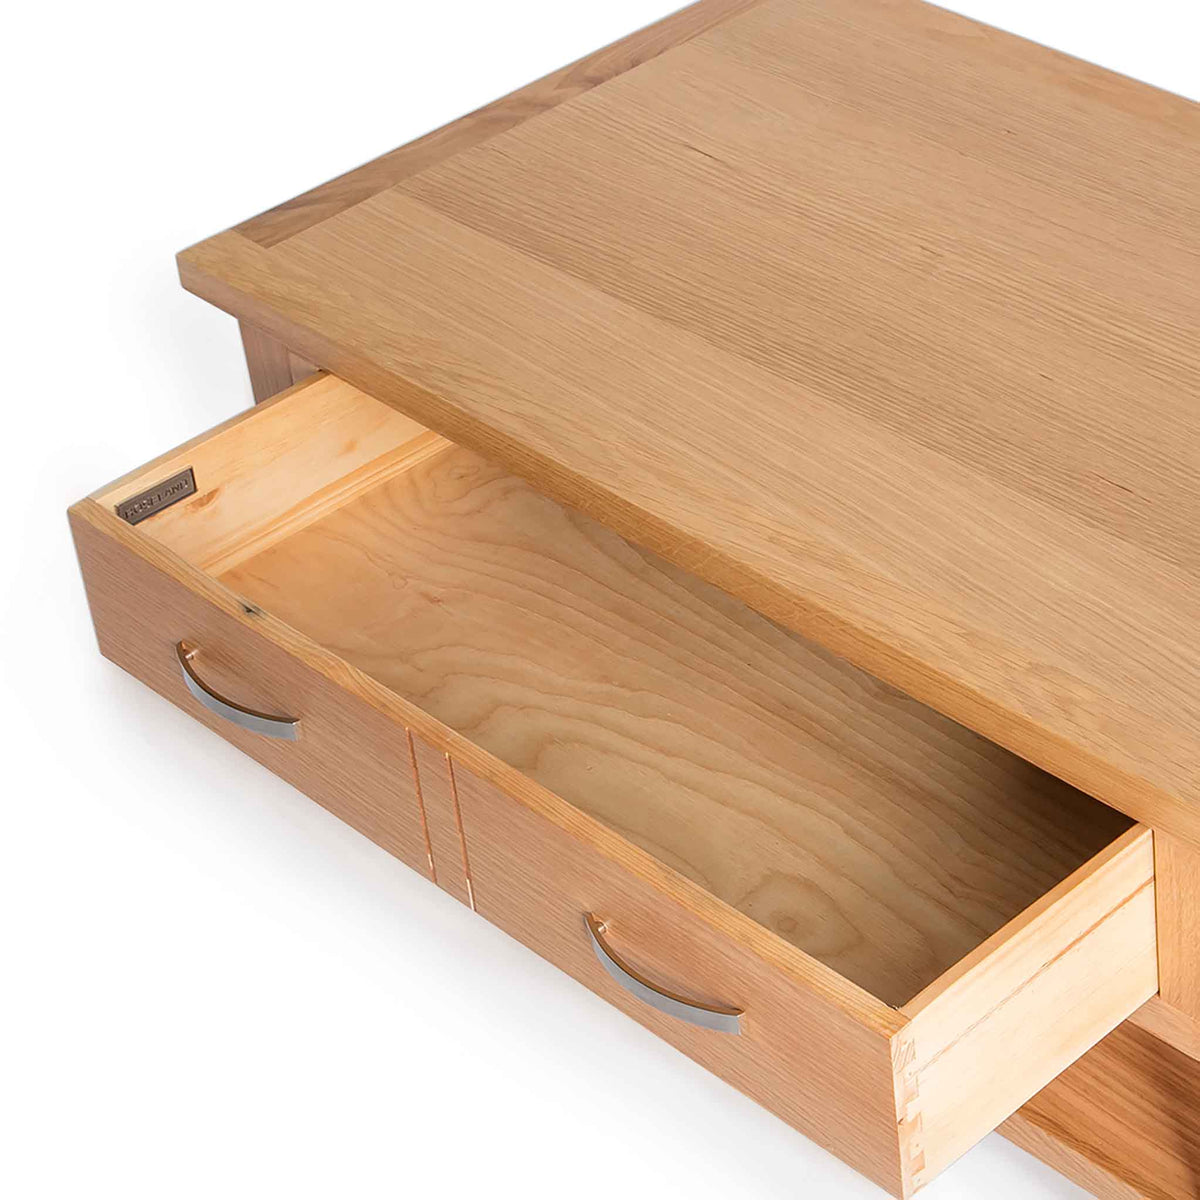 London Oak Coffee Table with Drawer - Inside view of drawer